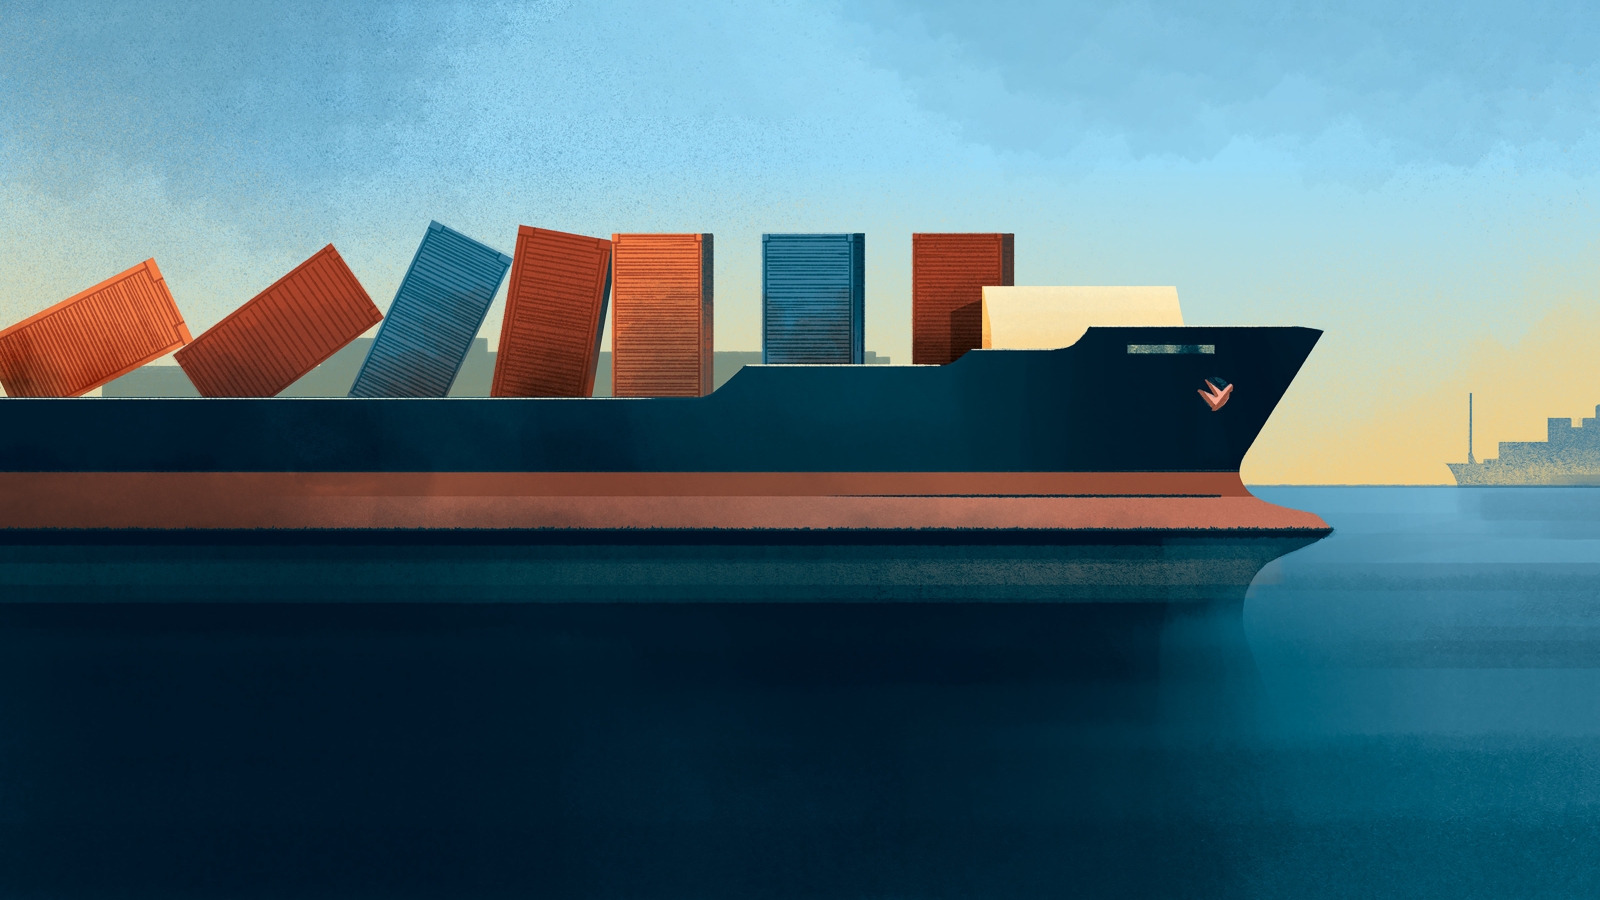 Digital Illustration of a cargo ship. The shipping crates on deck are arranged to look like dominioes in a line toppling over. Another cargo ship is faded out in the distance.